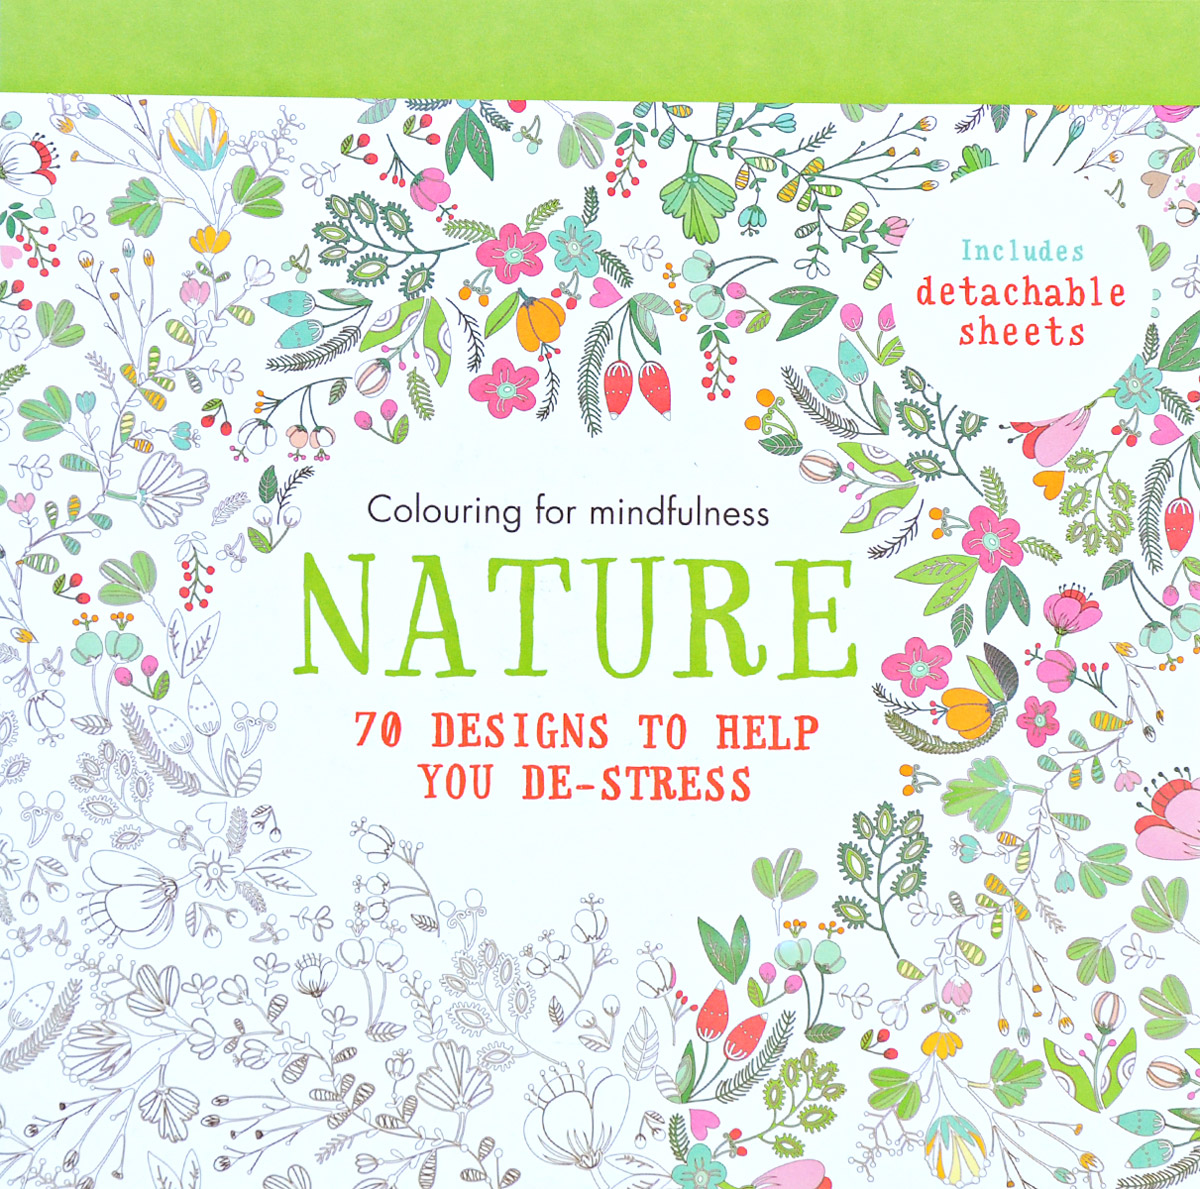 Nature: 70 Designs to Help You De-Stress: Colouring for Mindfulness